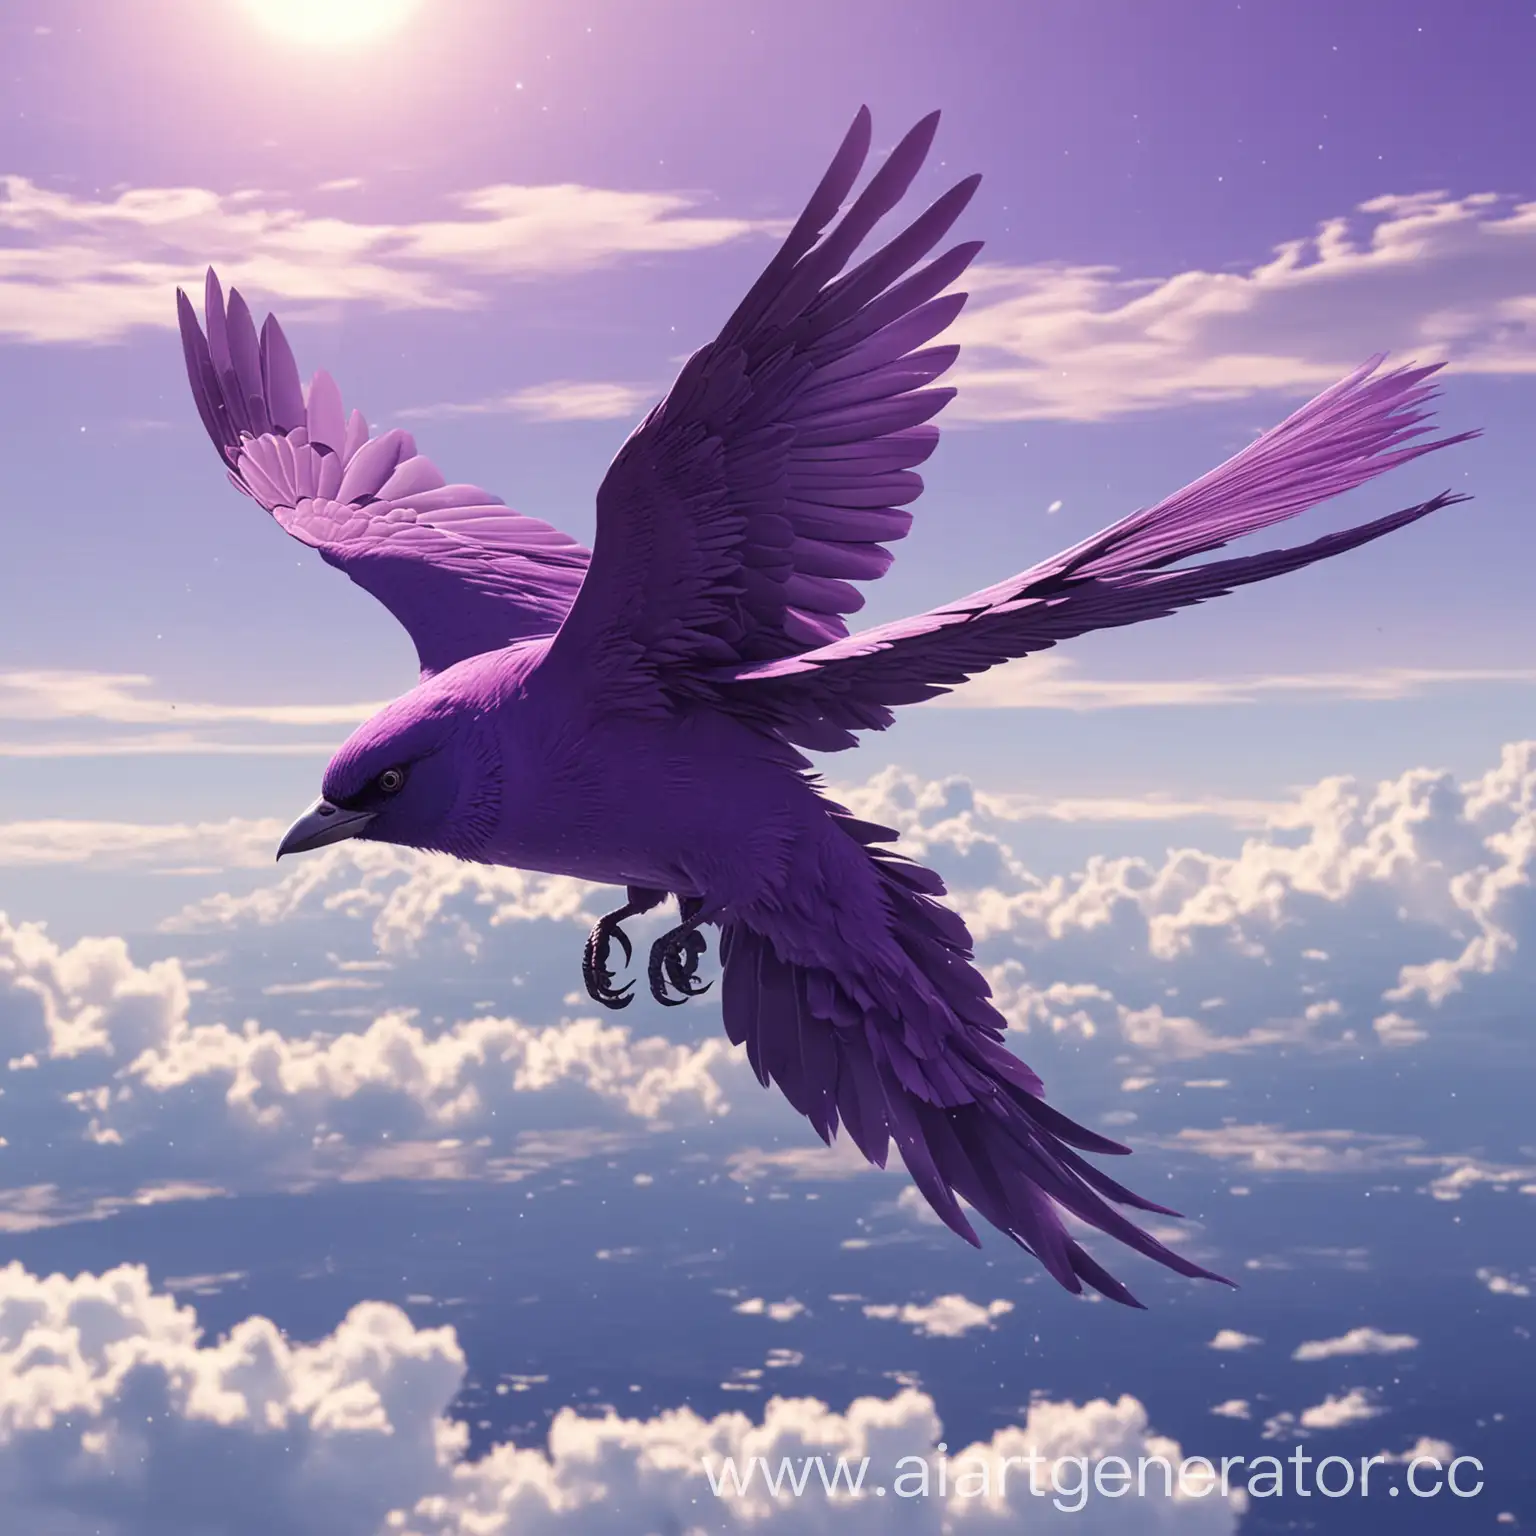 Purple-SingleColored-Bird-in-Anime-Style-Flying-in-the-Sky